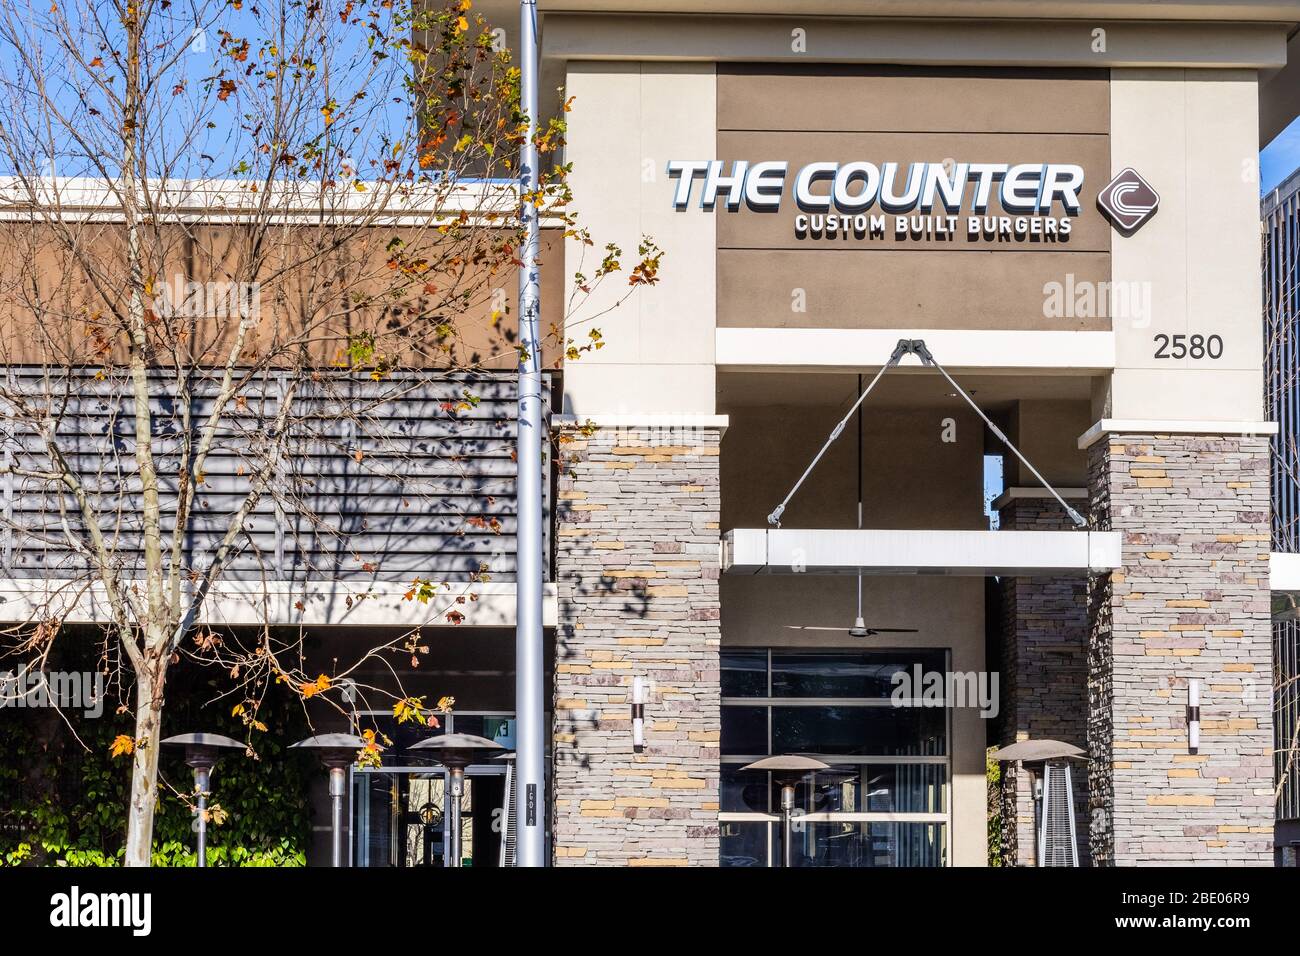 Jan 24, 2020 Mountain View / CA / USA - The Counter restaurant location; The Counter is a high-end casual dining restaurant chain offering custom-topp Stock Photo